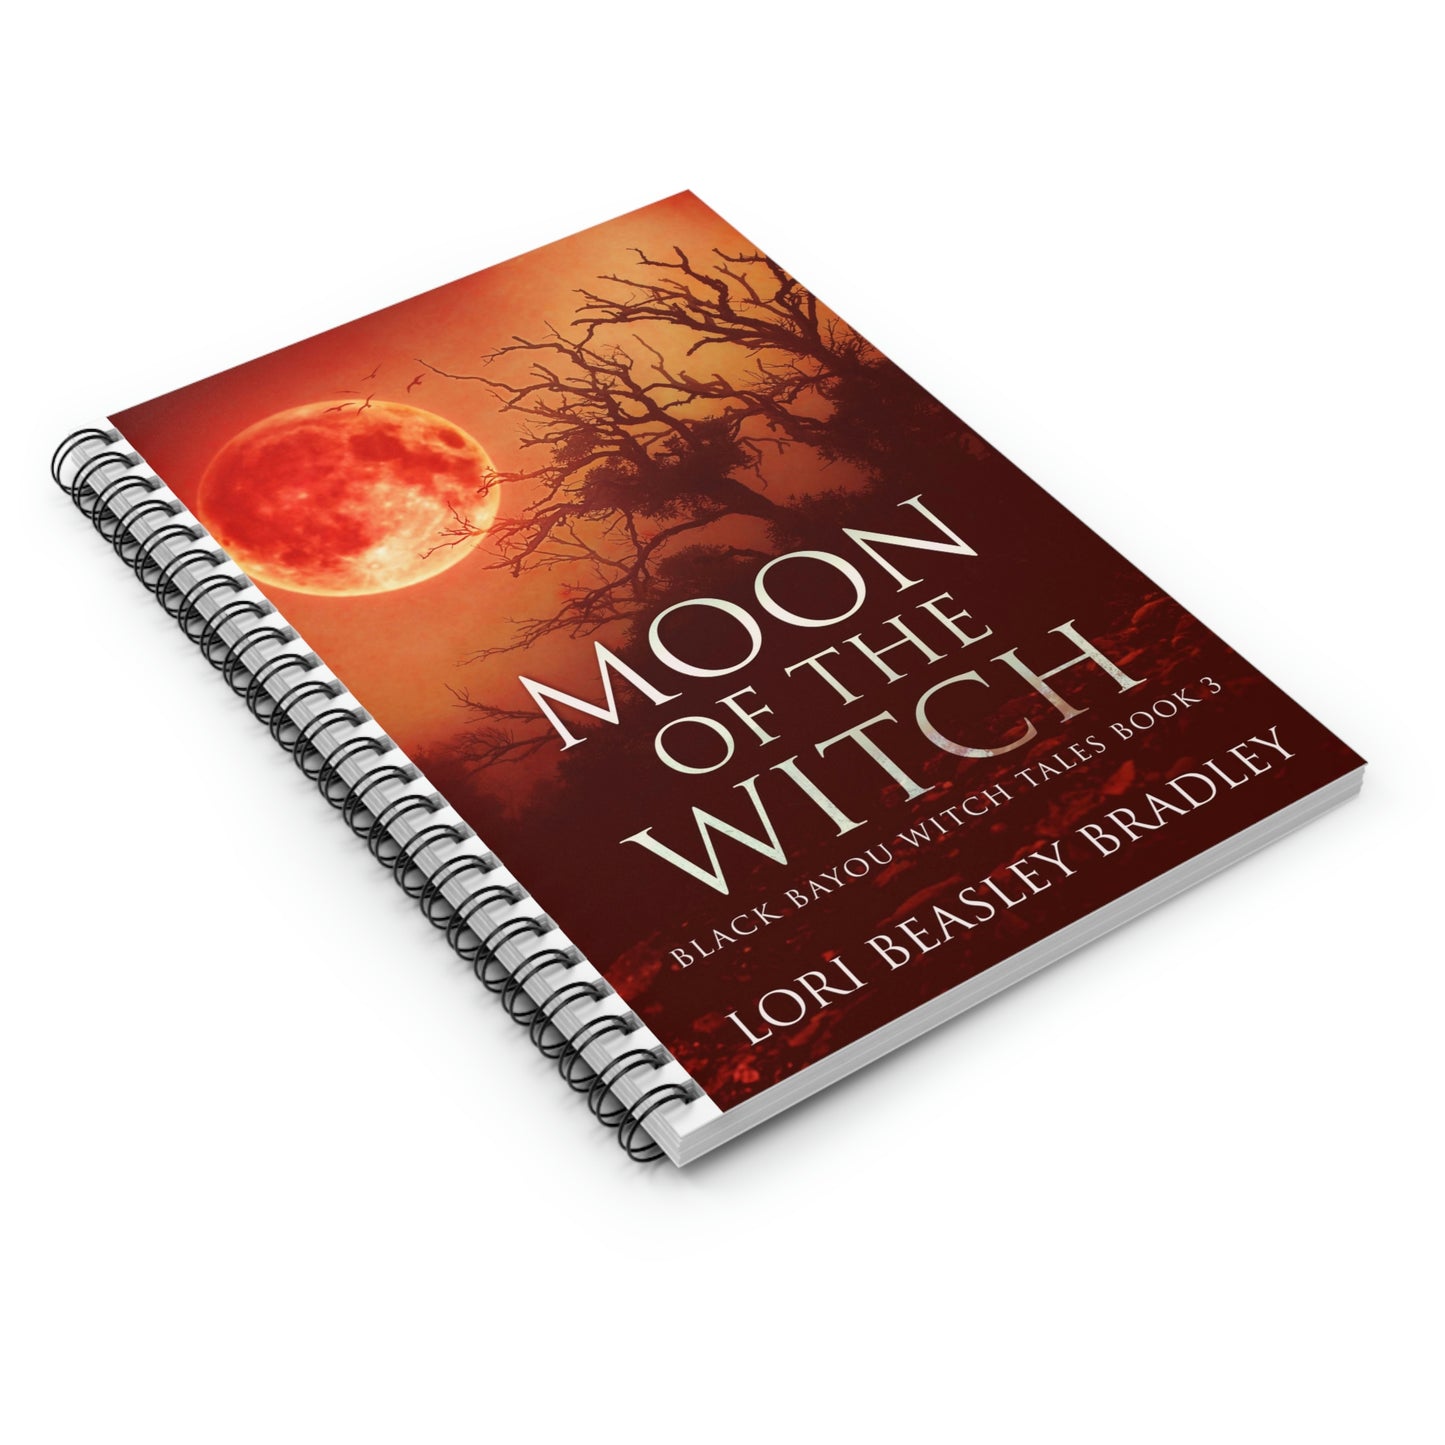 Moon Of The Witch - Spiral Notebook